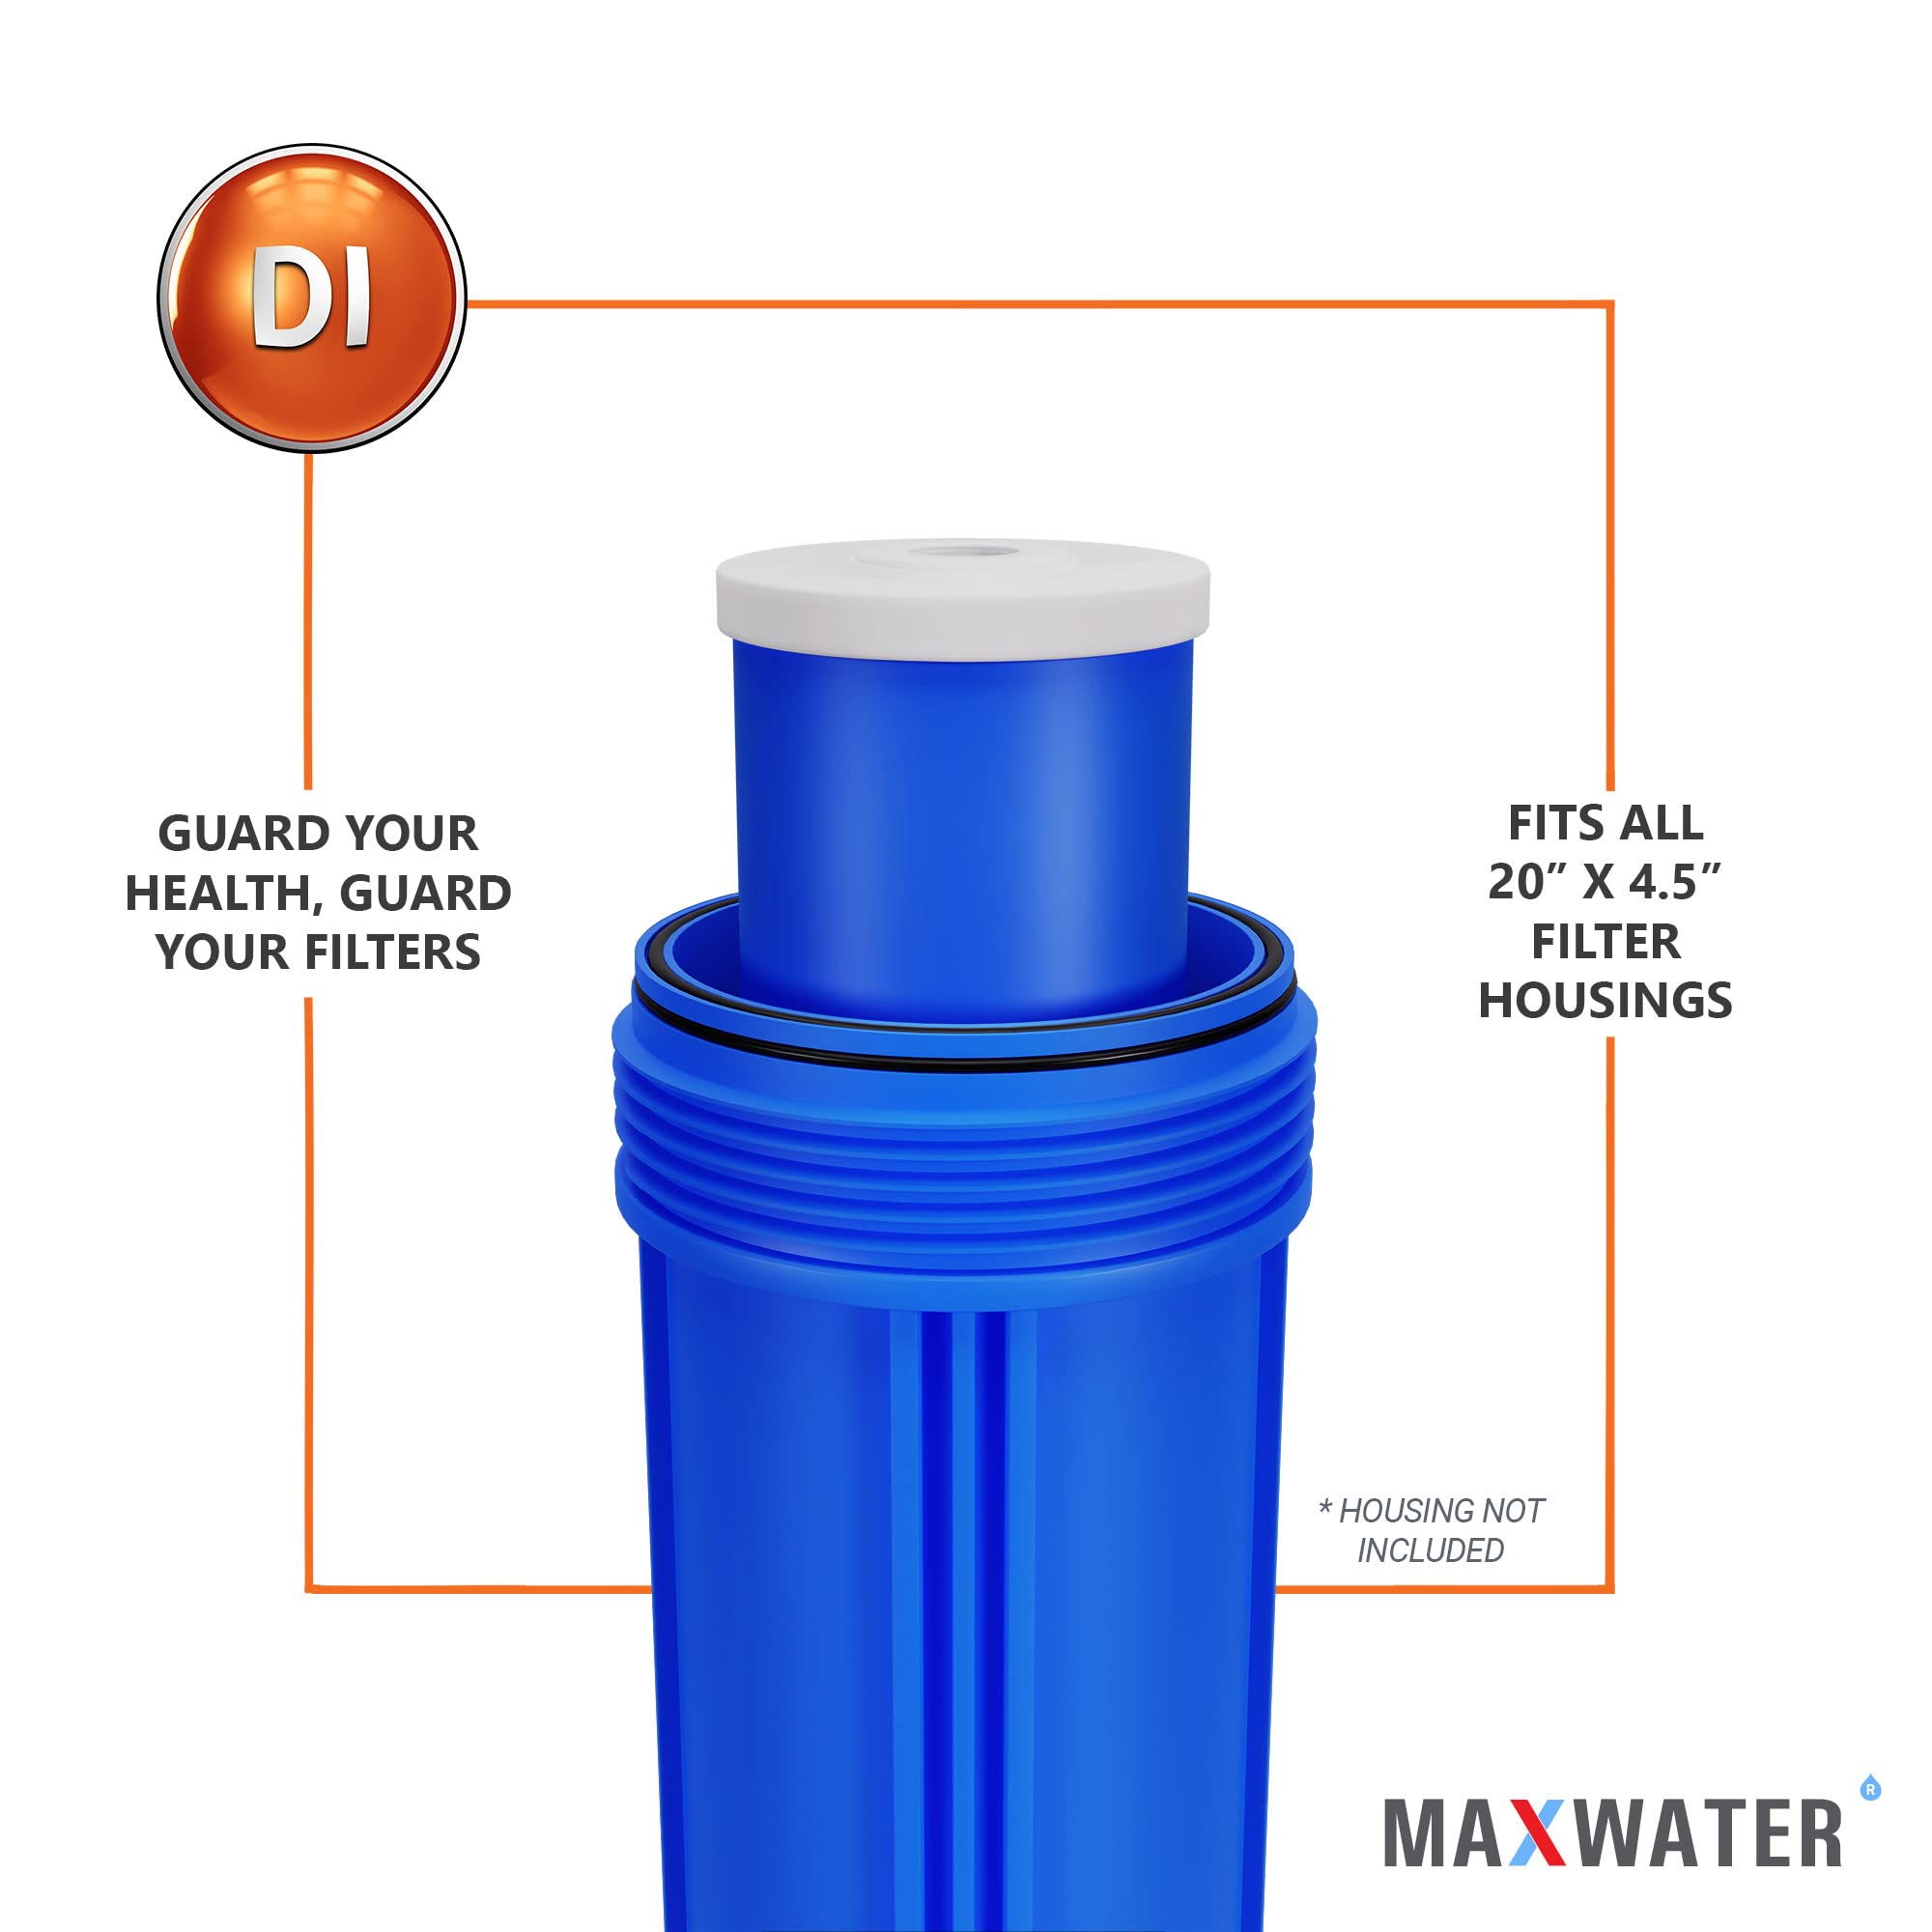 Max Water 20" BB Whole House Refillable Mixed Bed De-Ionization Water Filter Size 20" x 4.5" Compatible with 20" BB Whole House Water Filtration Systems for High TDS in Water (1x car/window)